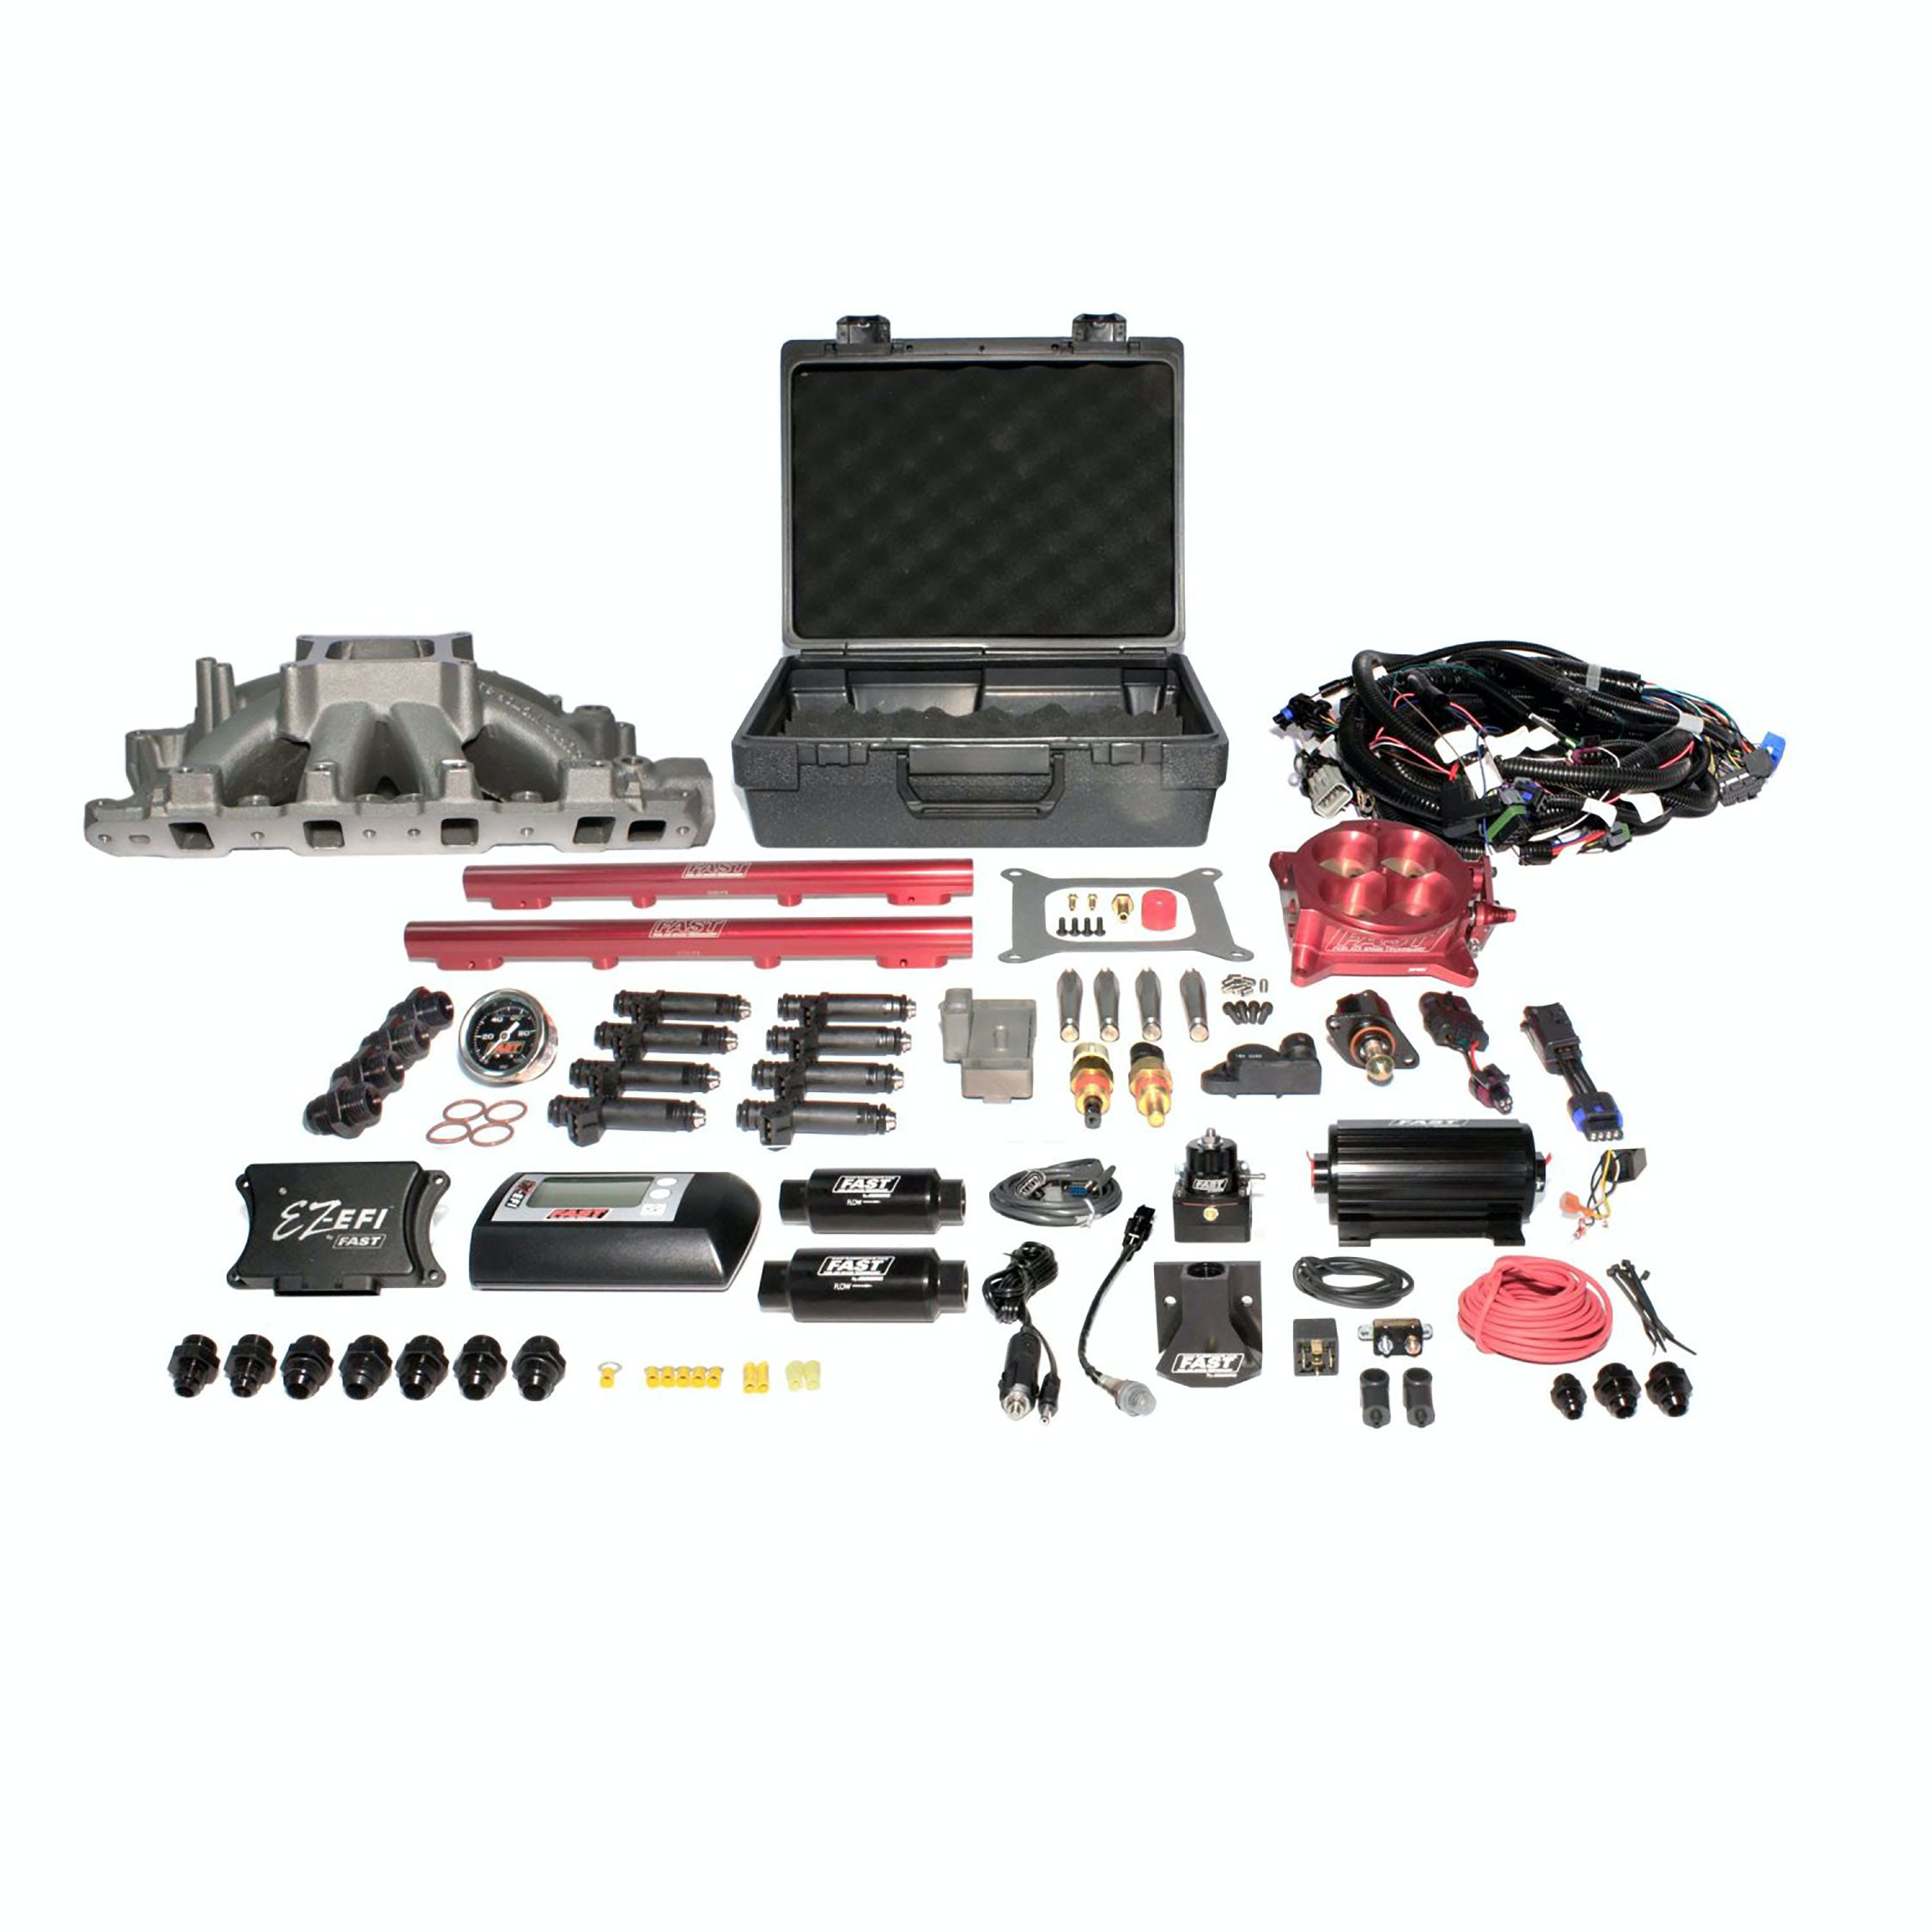 FAST - Fuel Air Spark Technology 3035351-05E EZ EFI Windsor Multiport System w/ Intake, Fuel System and Red Throttle Body